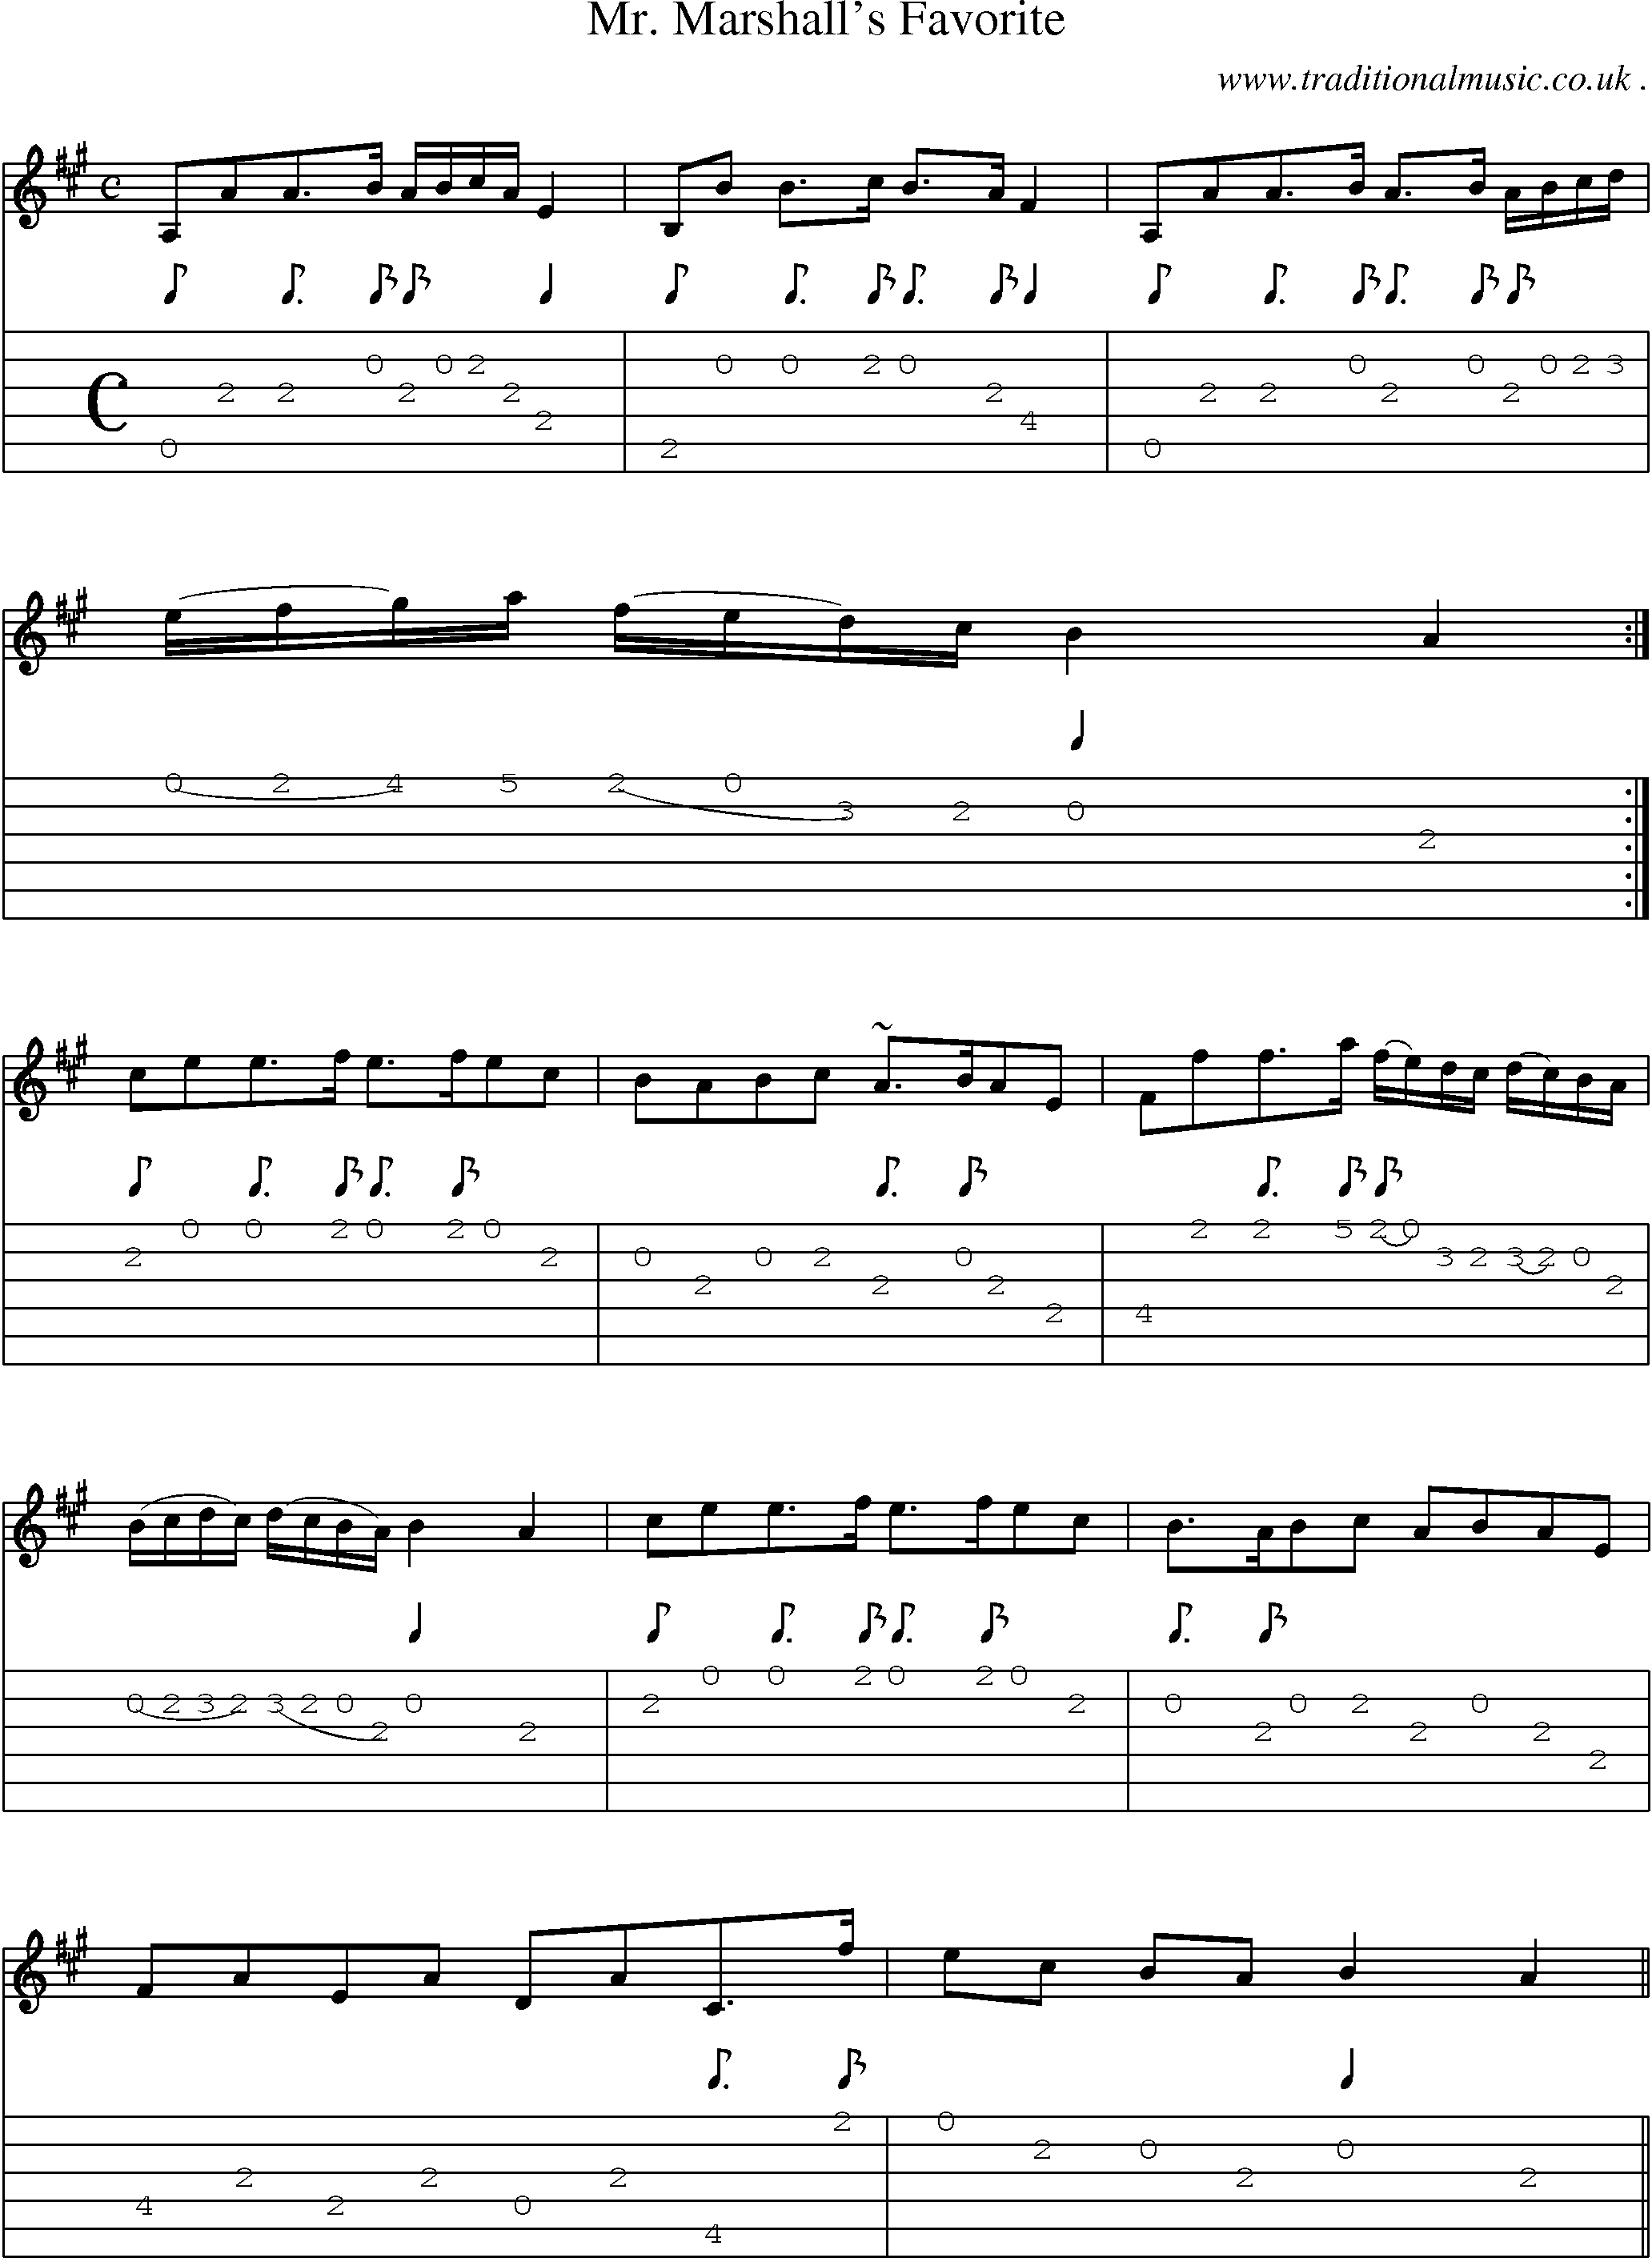 Sheet-music  score, Chords and Guitar Tabs for Mr Marshalls Favorite